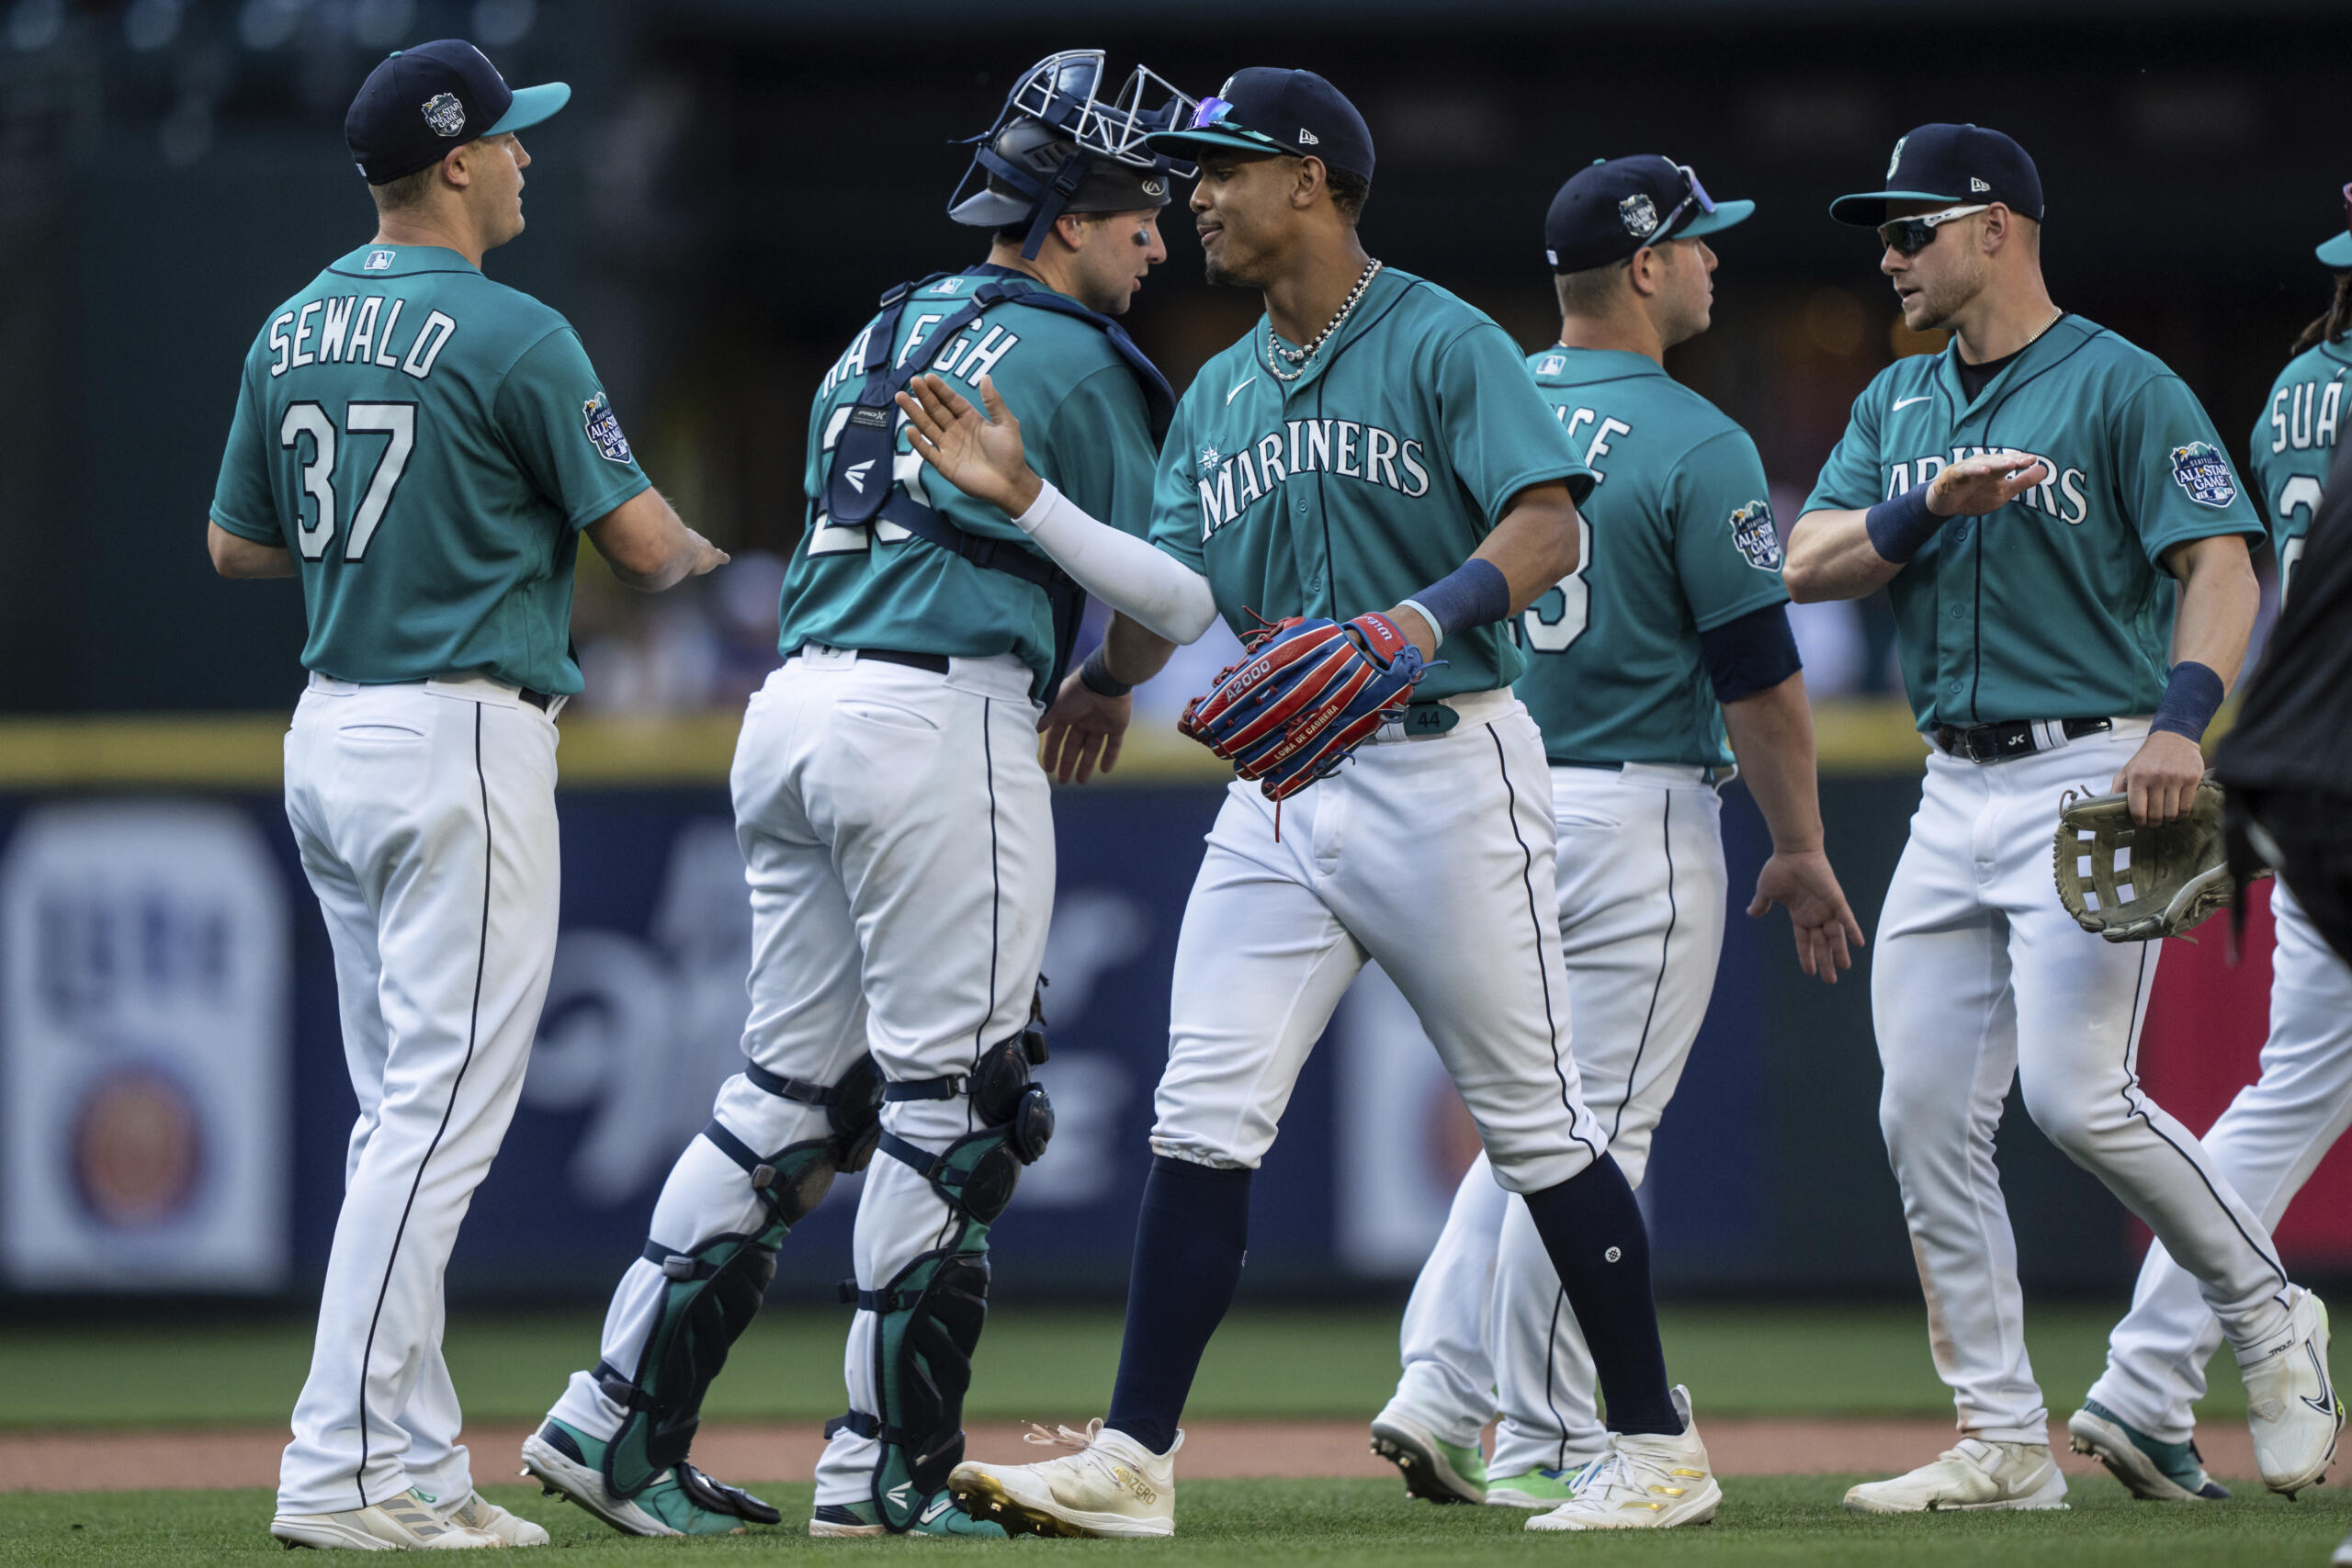 From left to right, Seattle Mariners relief pitcher Paul Sewald, catcher Cal Raleigh, centerfielder Julio Rodriguez, first baseman Ty France and left fielder Jarred Kelenic celebrate after a baseball game against the Tampa Bay Rays, Saturday, July 1, 2023, in Seattle.